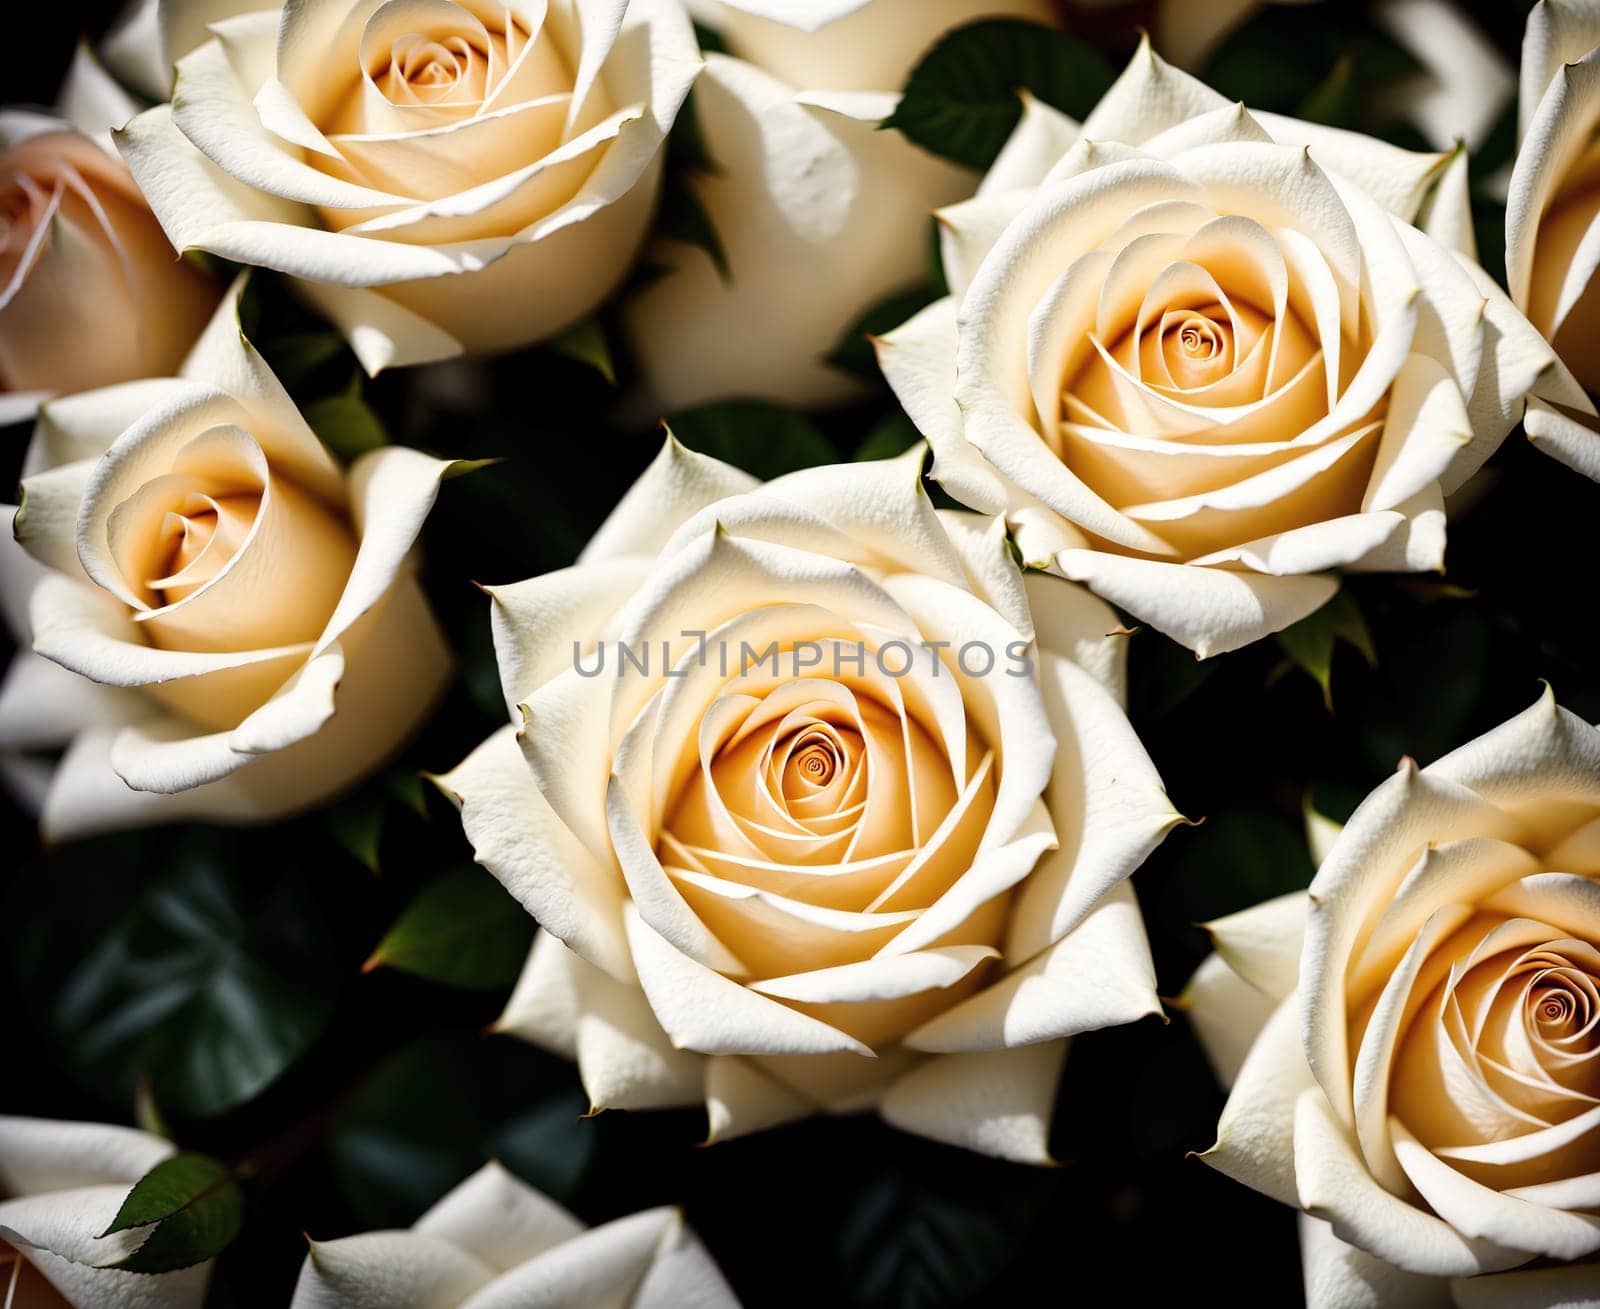 The image shows a bouquet of white roses arranged in a vase.